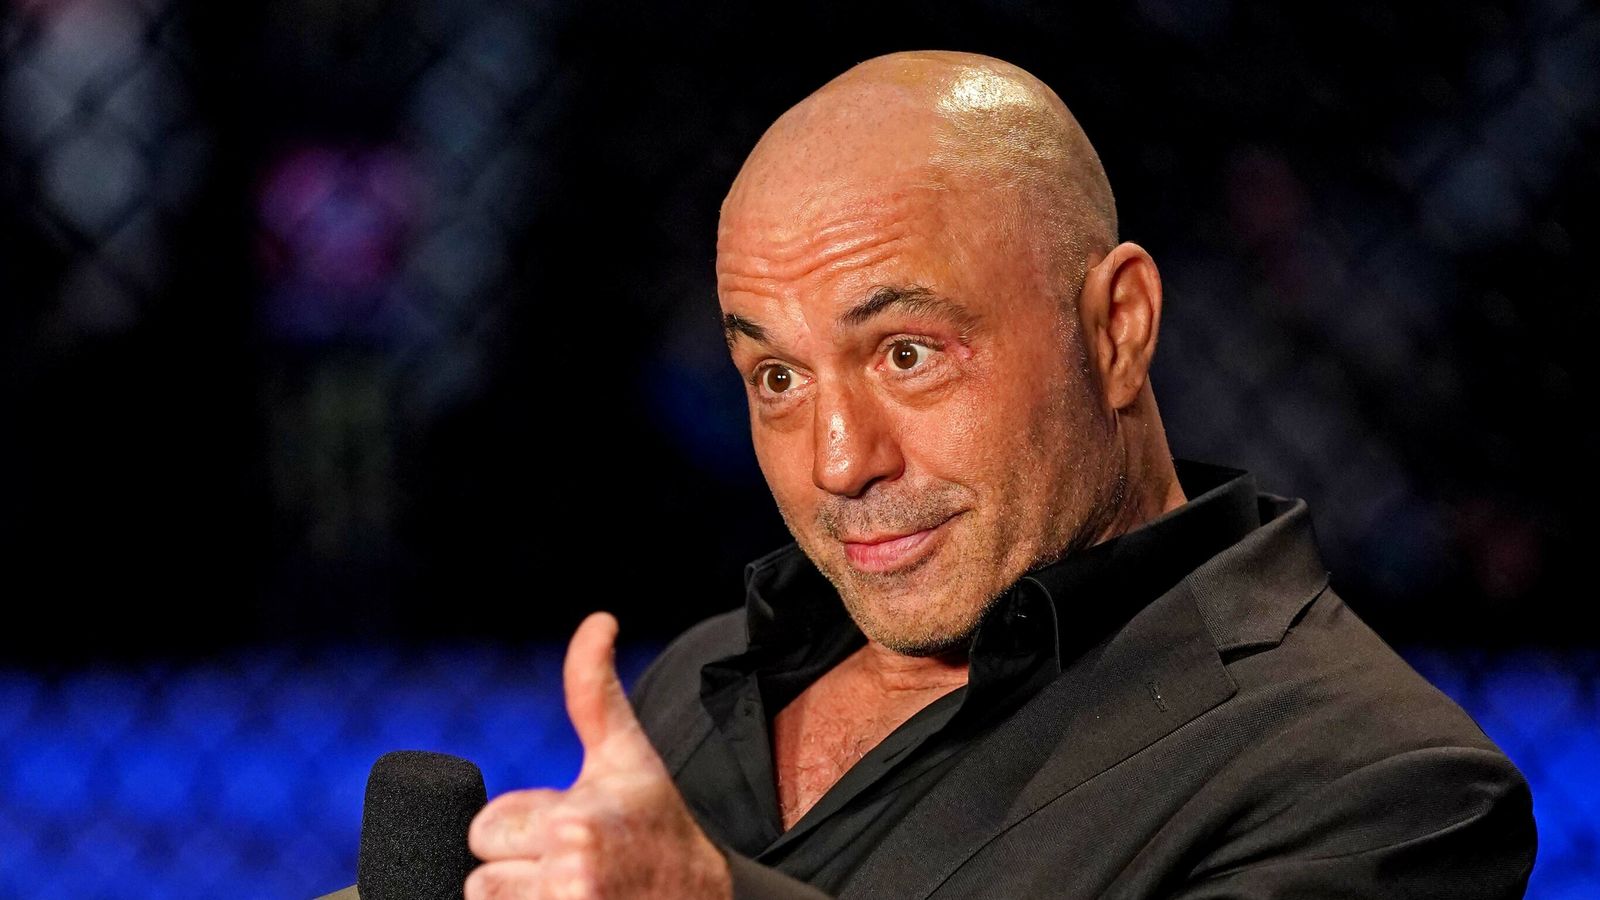 COVID-19: Joe Rogan – podcast host who suggested young people should not get vaccine – tests positive